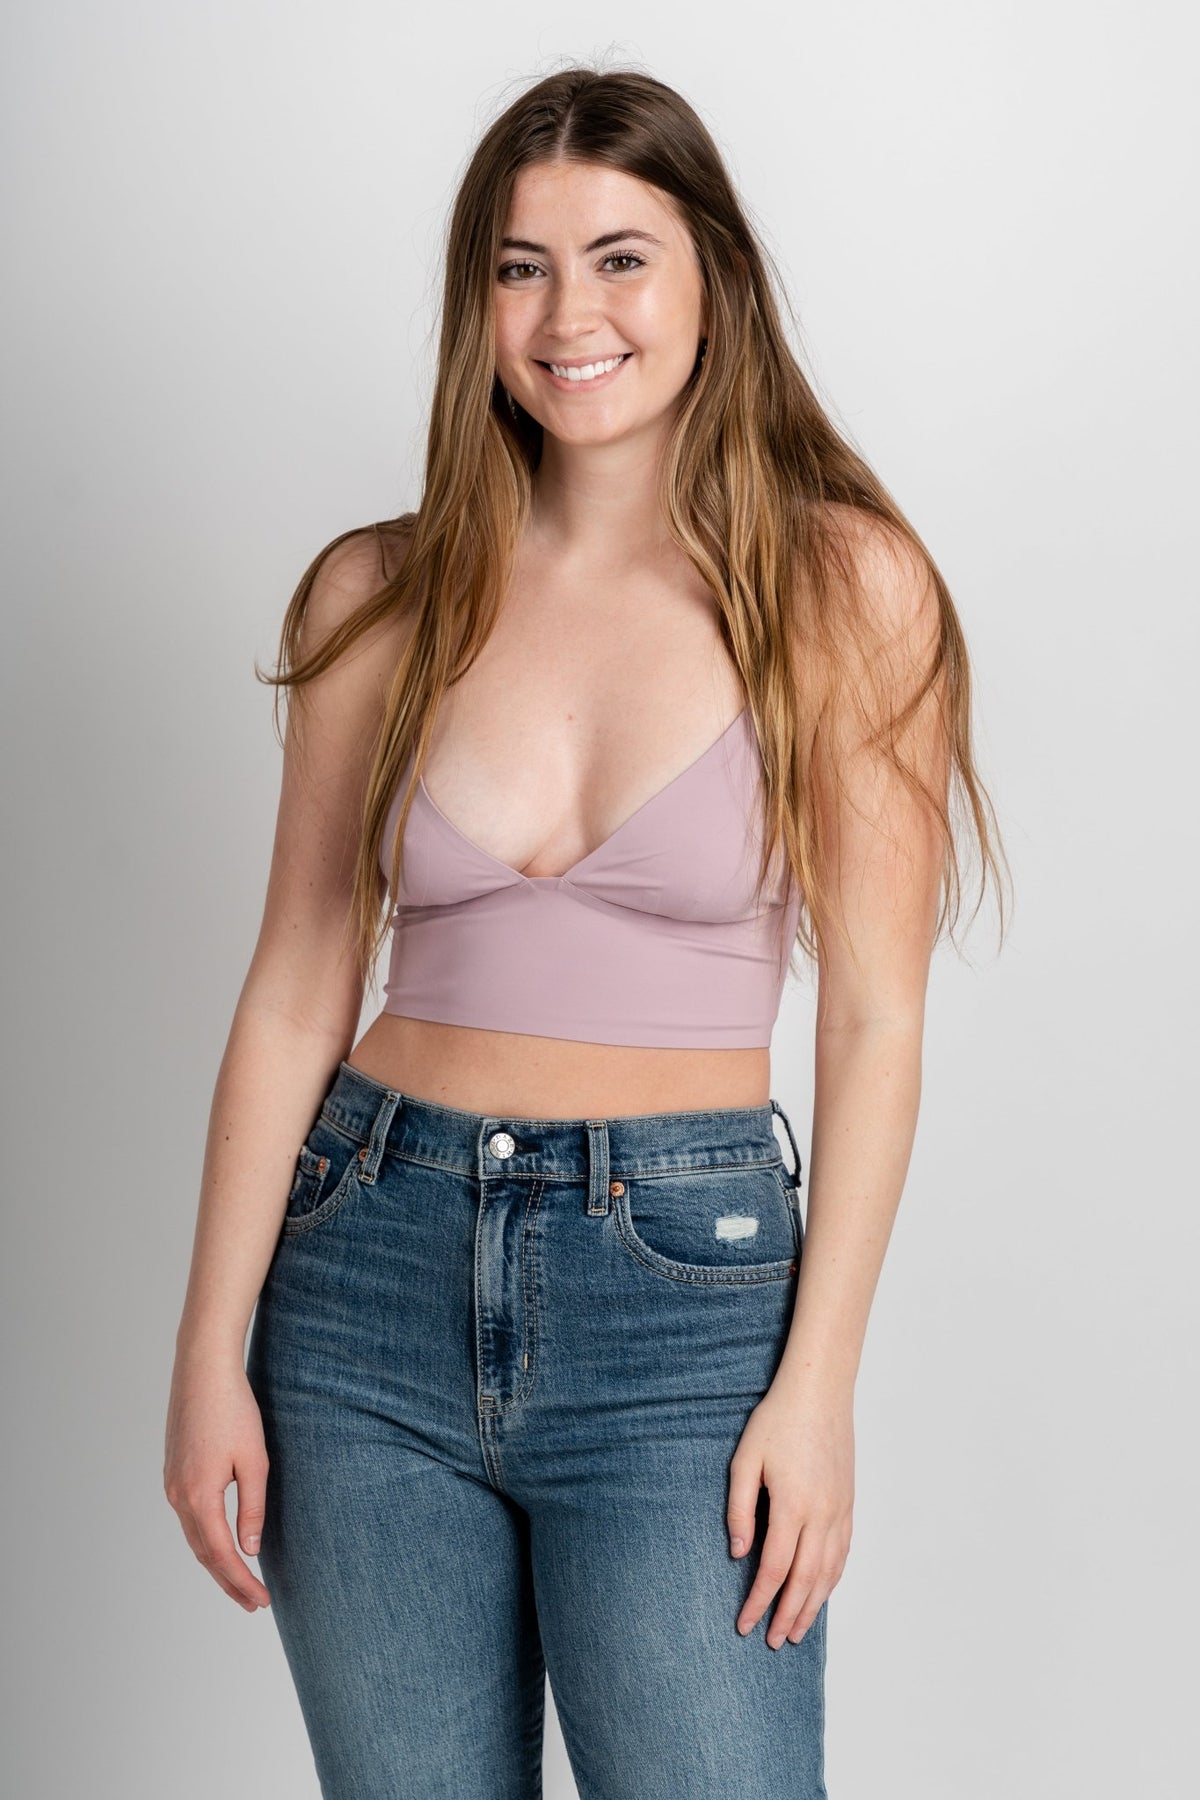 Triangle bralette lilac - Cute Bralette - Trendy Bras and Bralettes at Lush Fashion Lounge Boutique in Oklahoma City